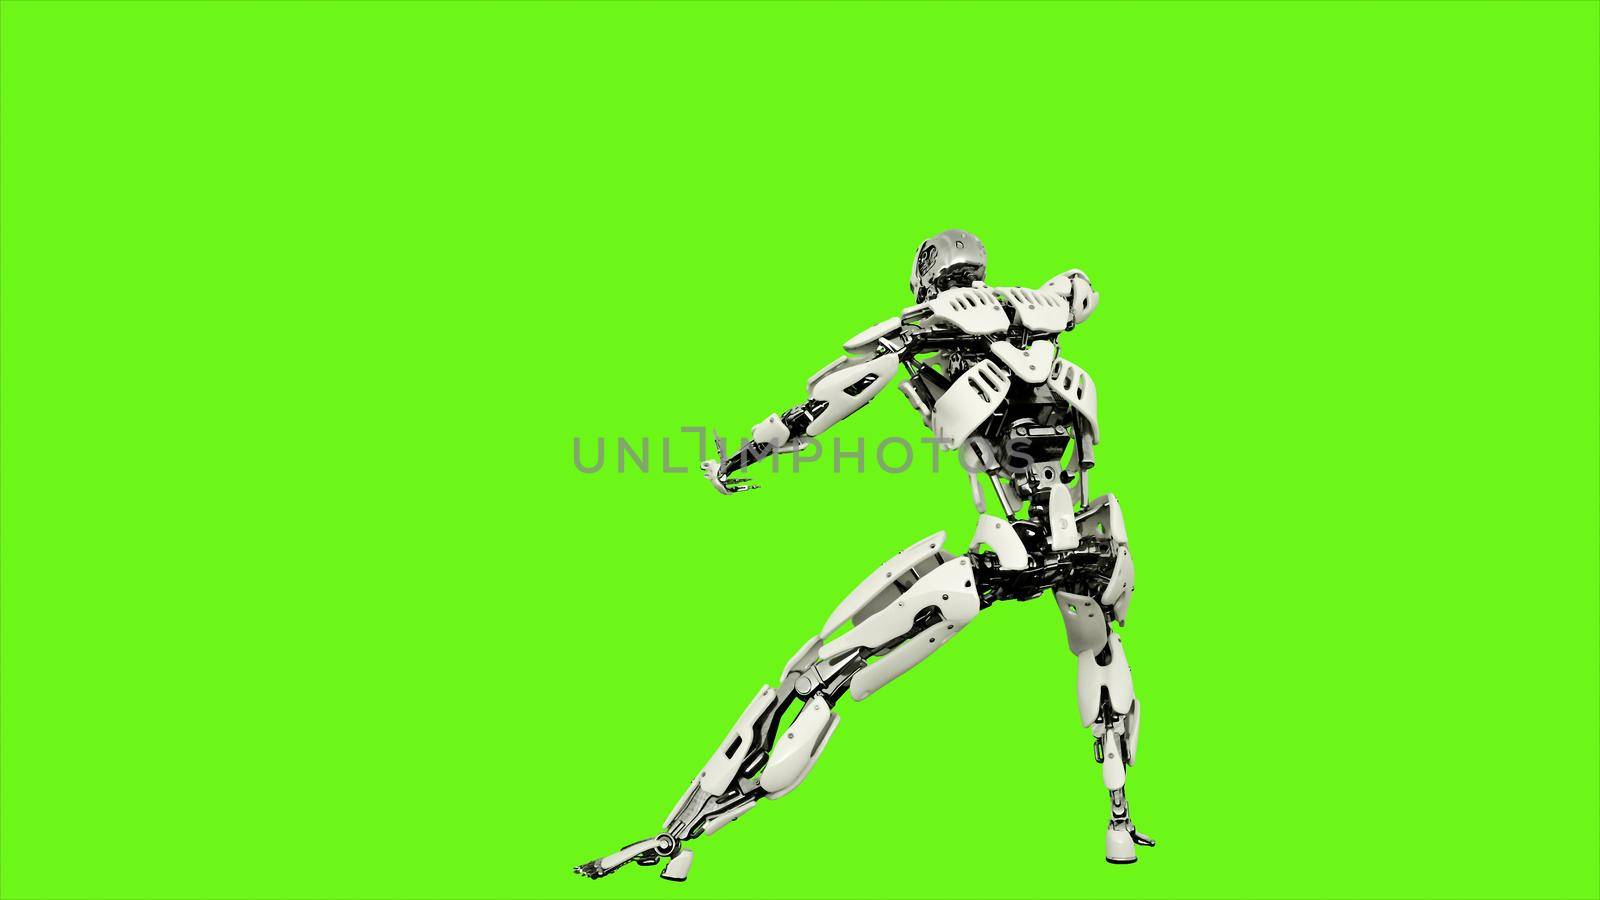 Robot android is launches a ball of energy. Illustration on green screen background.